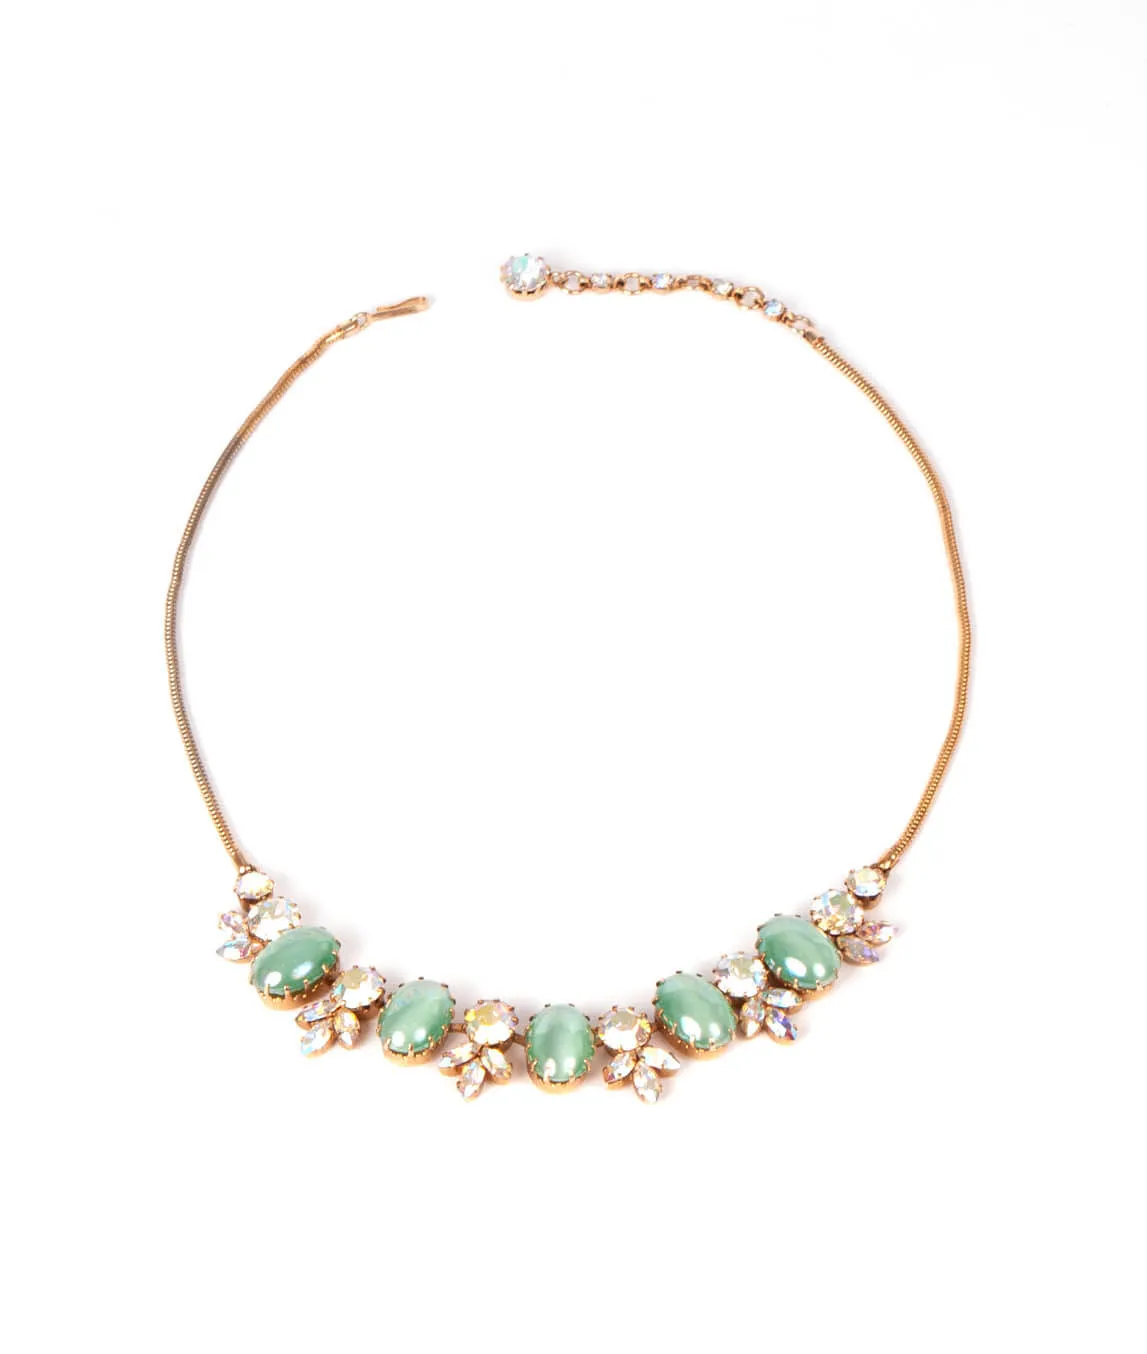 Vintage 1950s green and crystal necklace